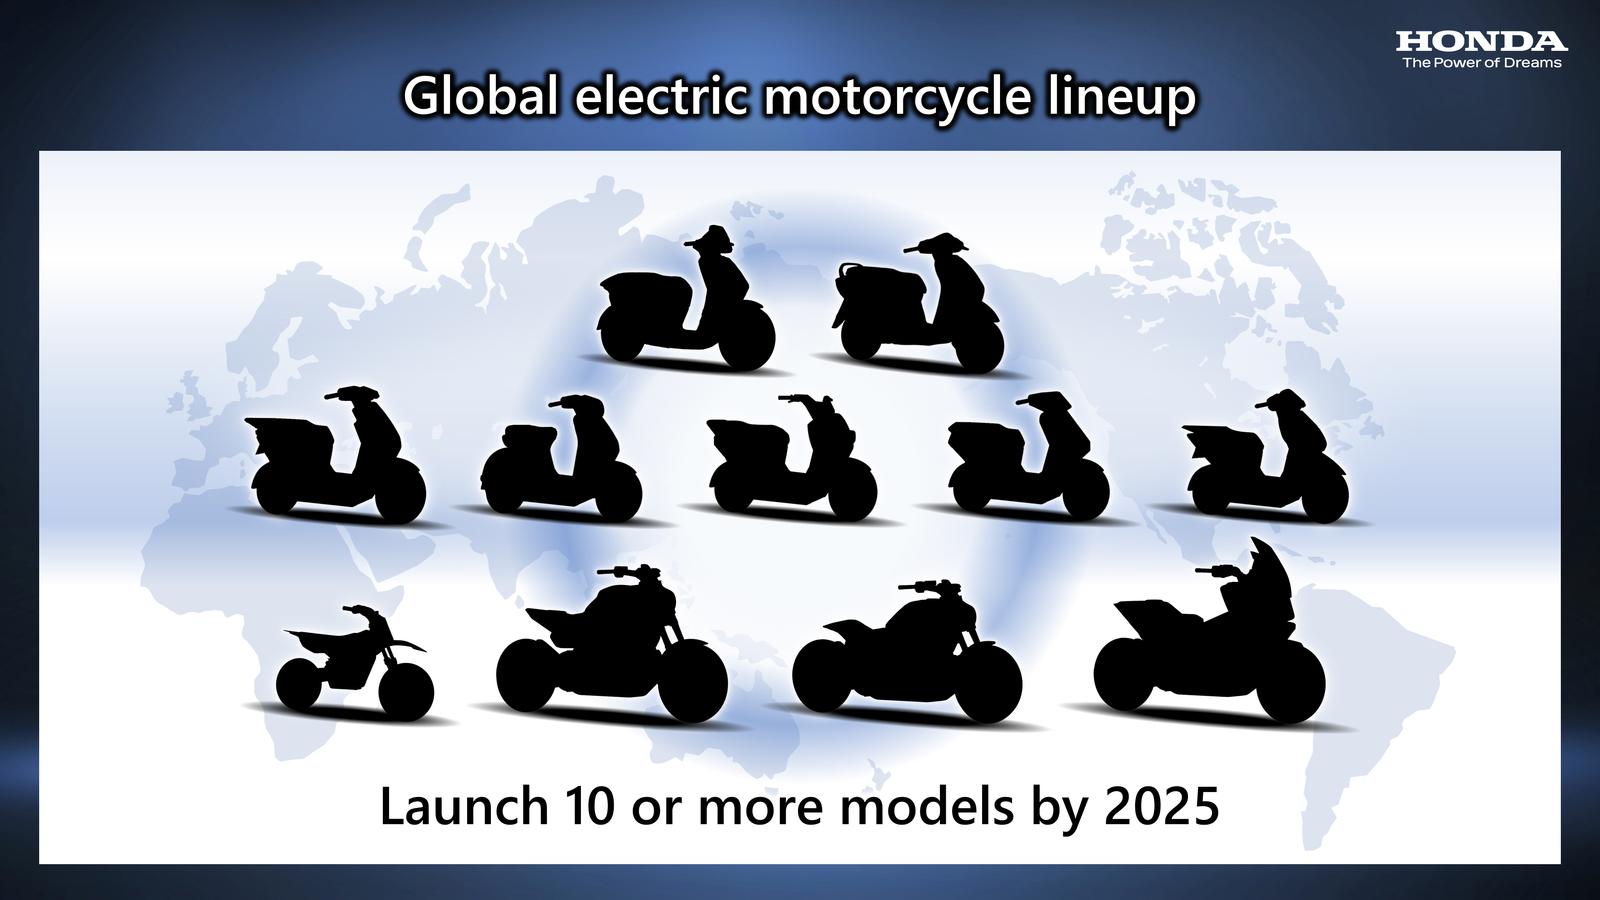 ectric-motorcycle-lineup_attached-to-press-release.jpg